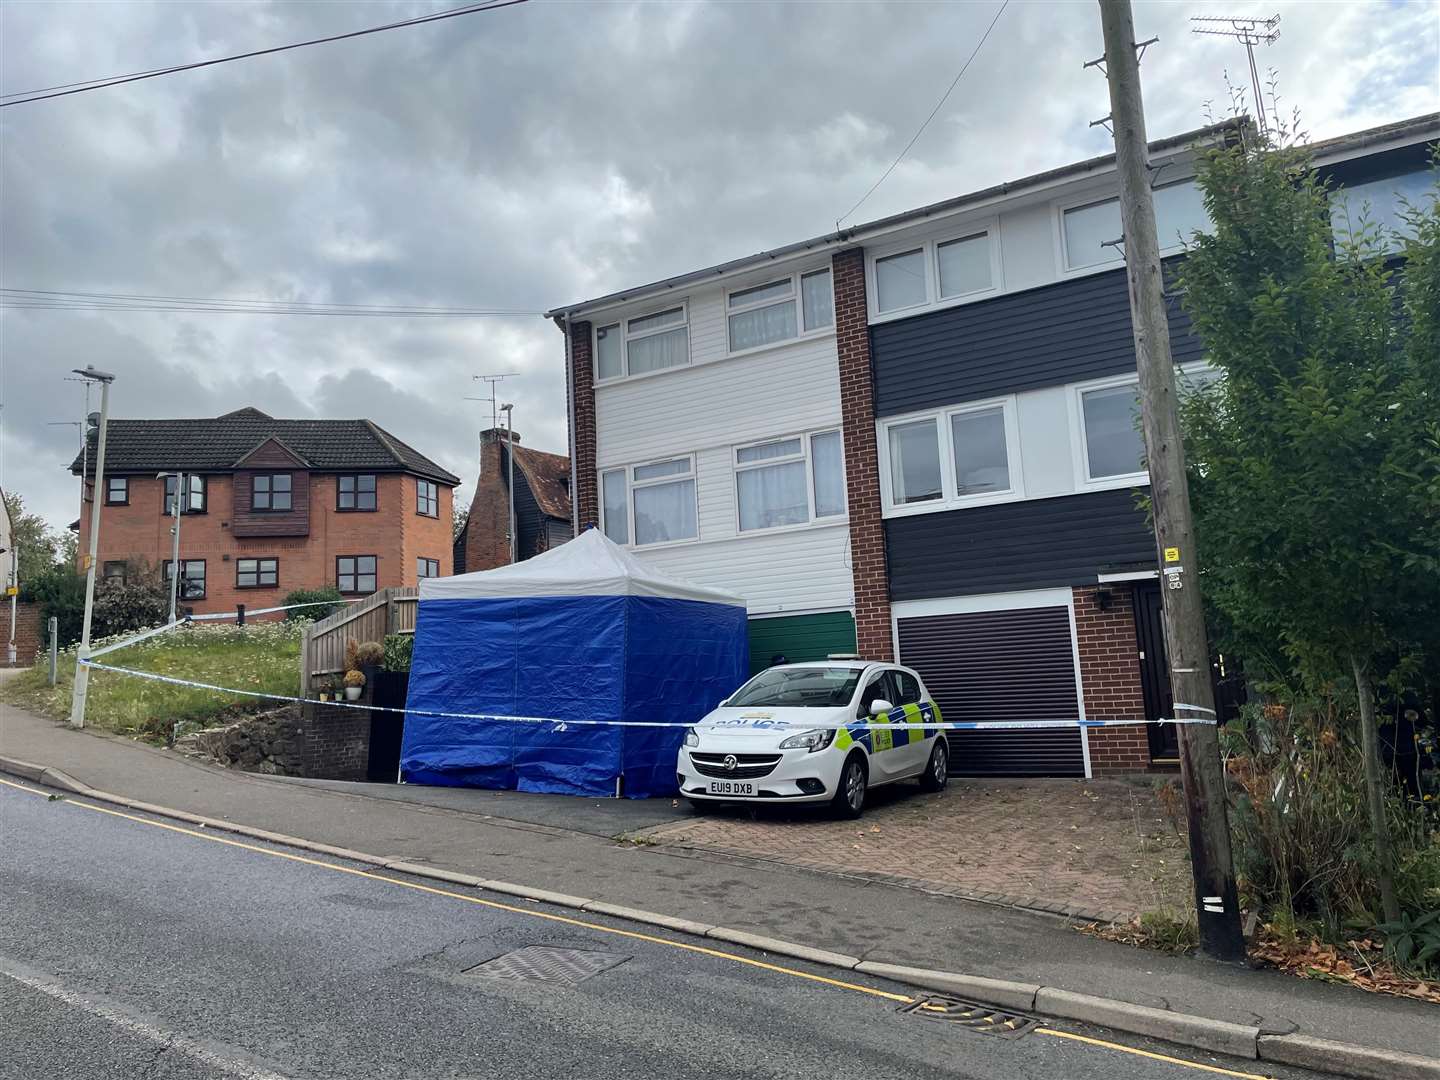 Mrs McCullough died in Pump Hill, Chelmsford, Essex, while human remains were found at the same address (Sam Russell/ PA)